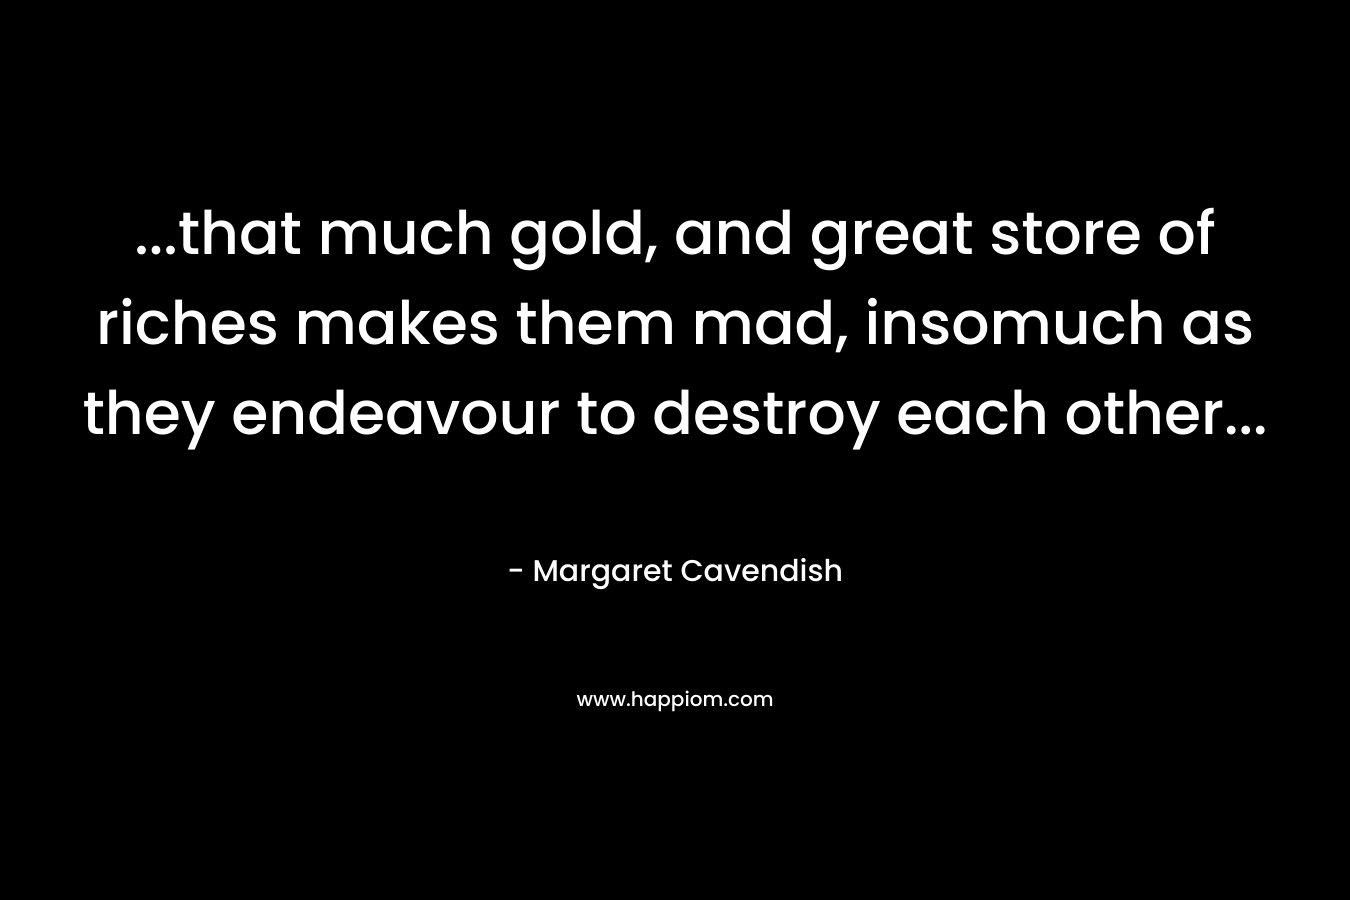 ...that much gold, and great store of riches makes them mad, insomuch as they endeavour to destroy each other...